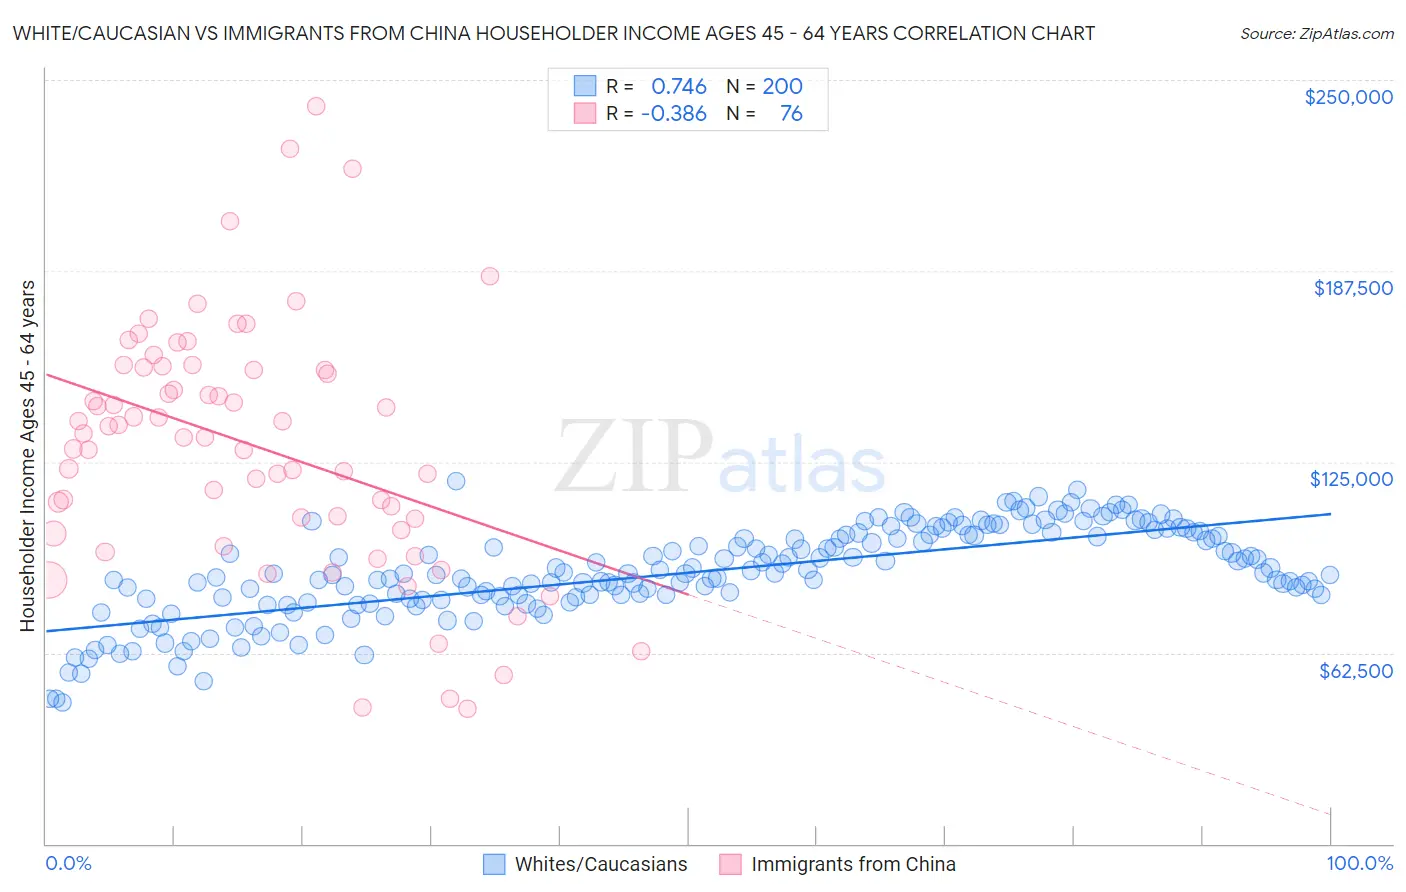 White/Caucasian vs Immigrants from China Householder Income Ages 45 - 64 years